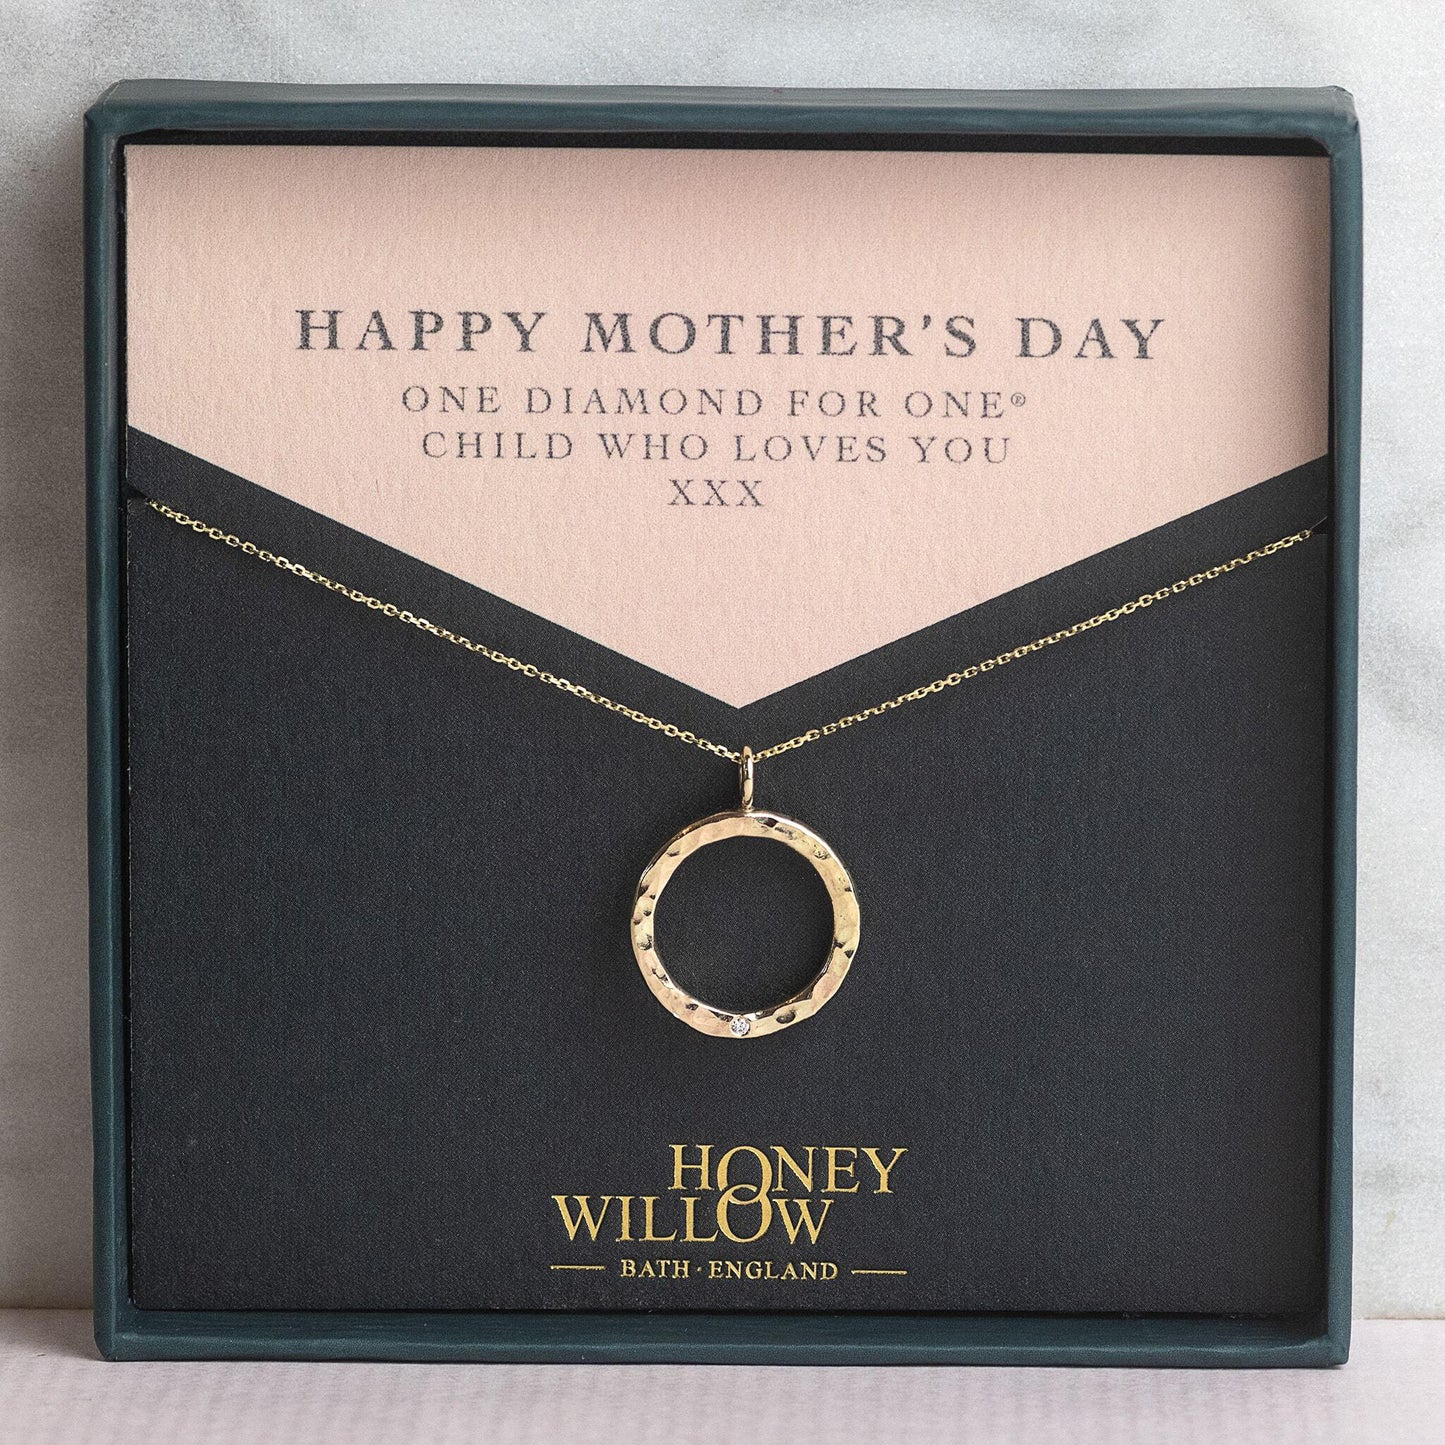 Mother's Day Gift - 9kt Gold Diamond Halo Necklace - 1 Diamond for 1® Child